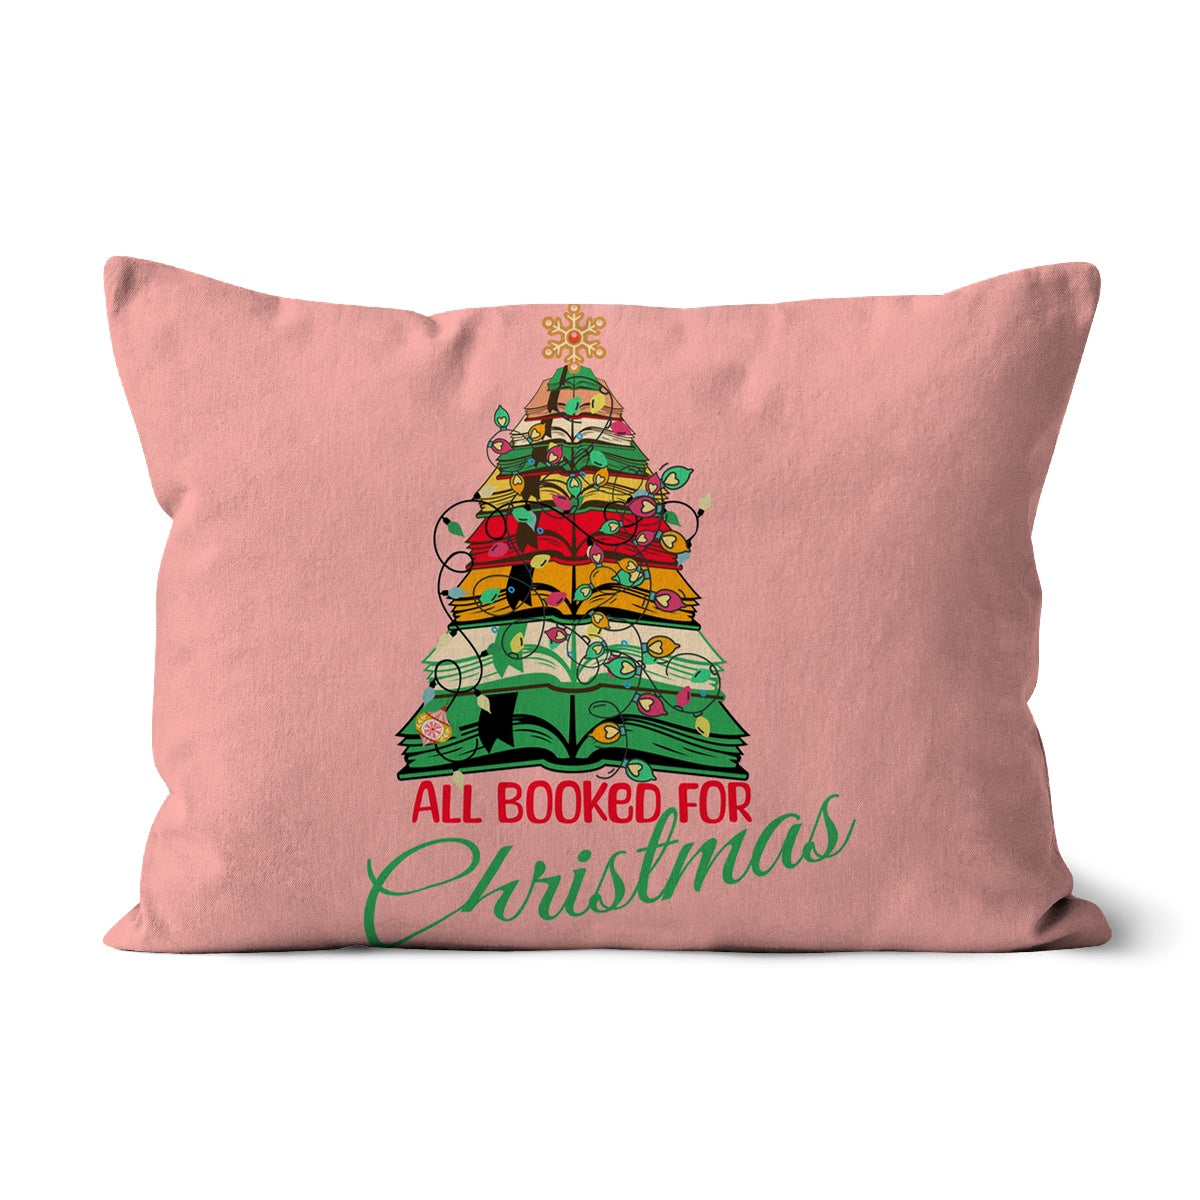 All Booked for Christmas Cushion